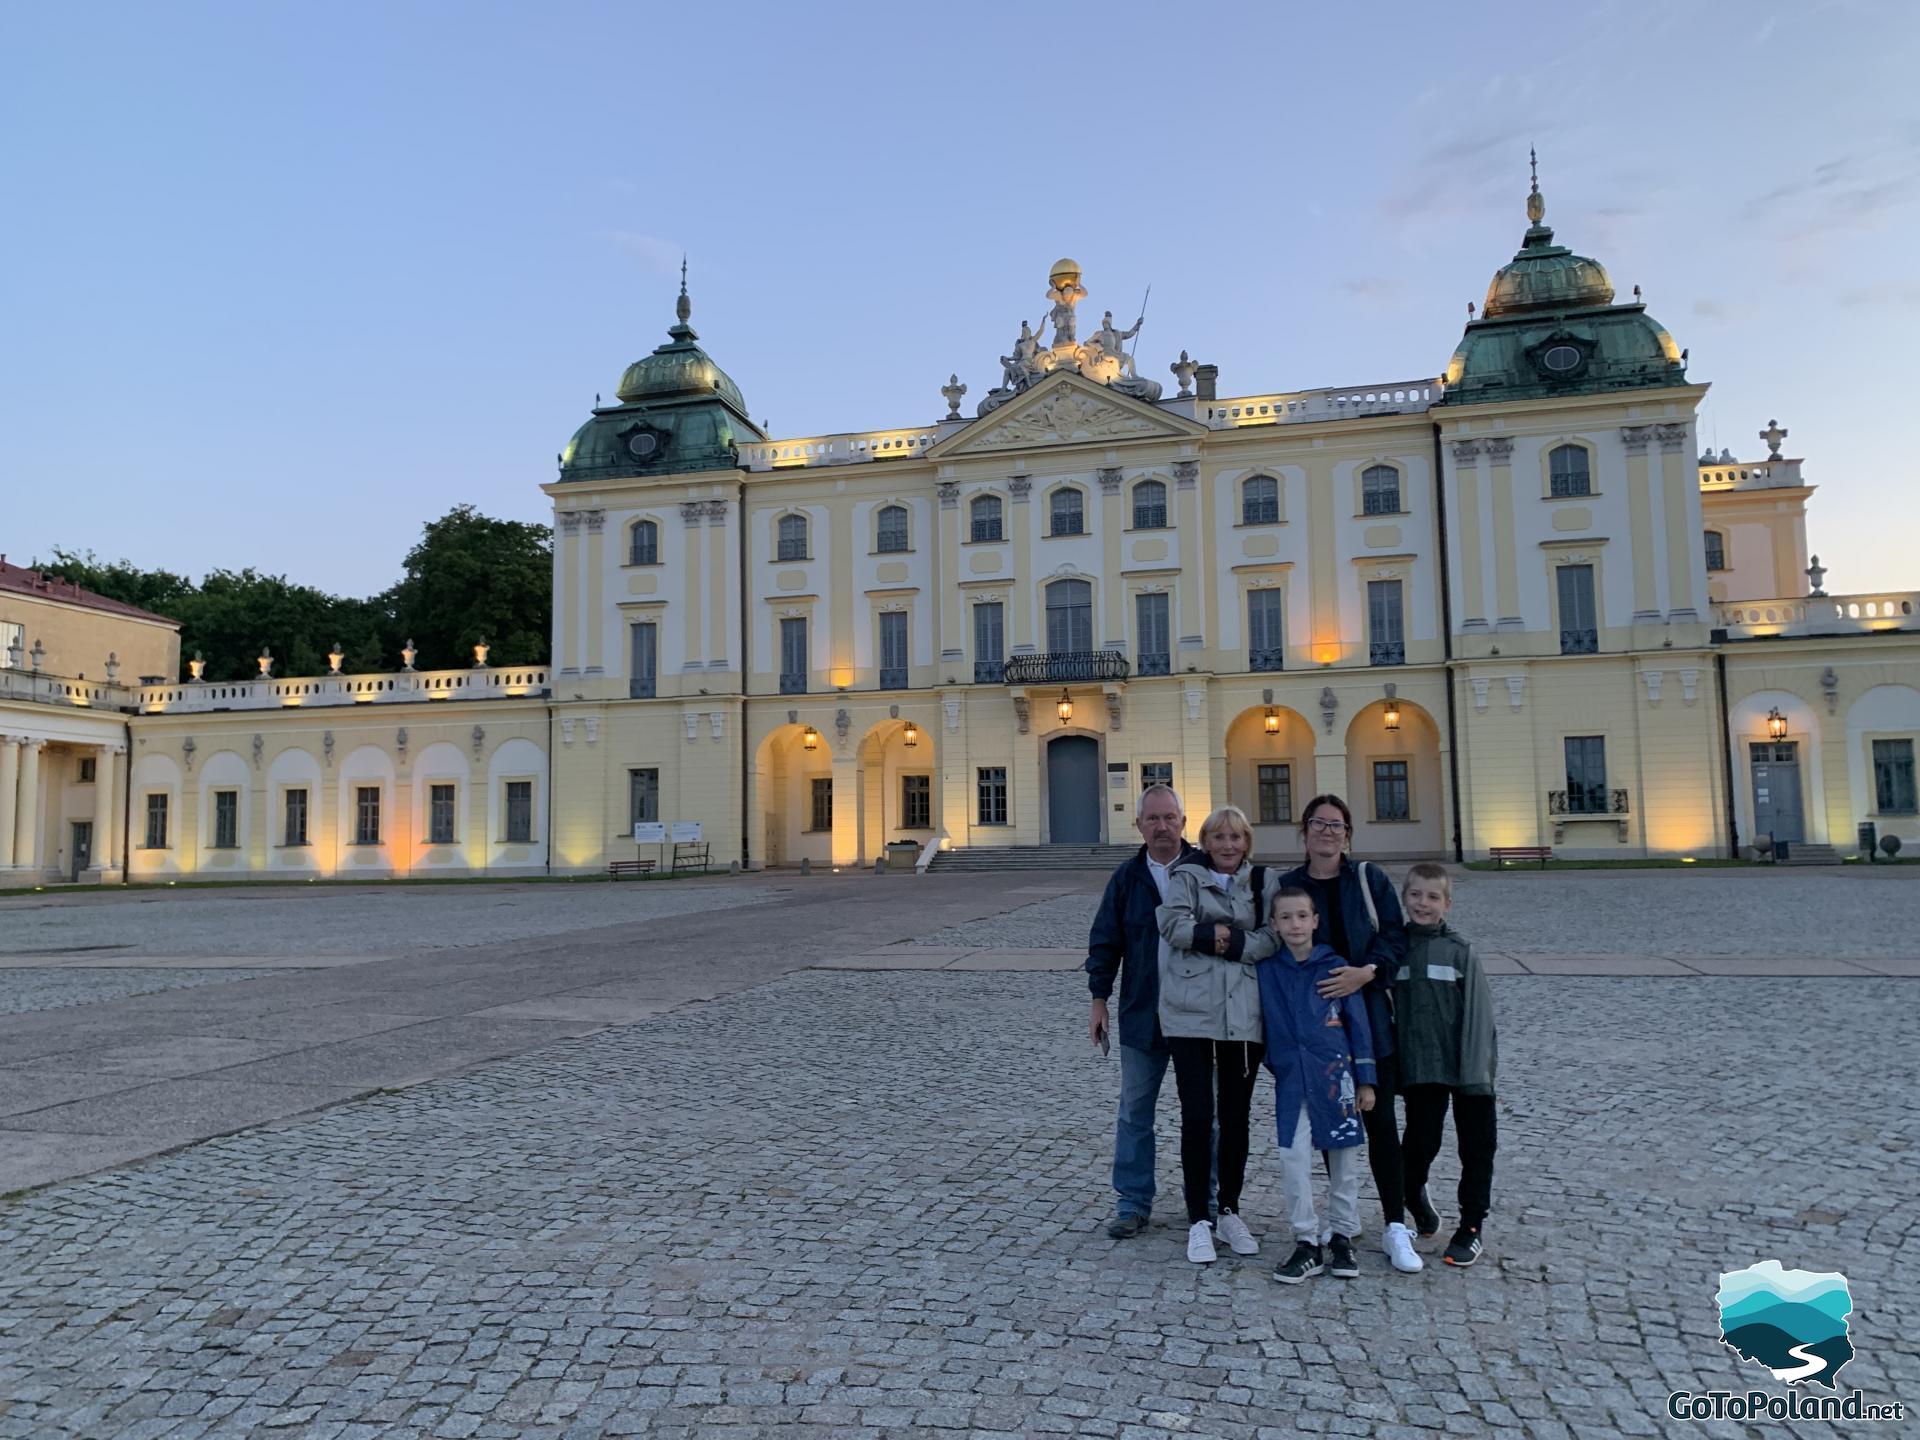 a family is standing in front of the castle, the palace is illuminated because it is already evening